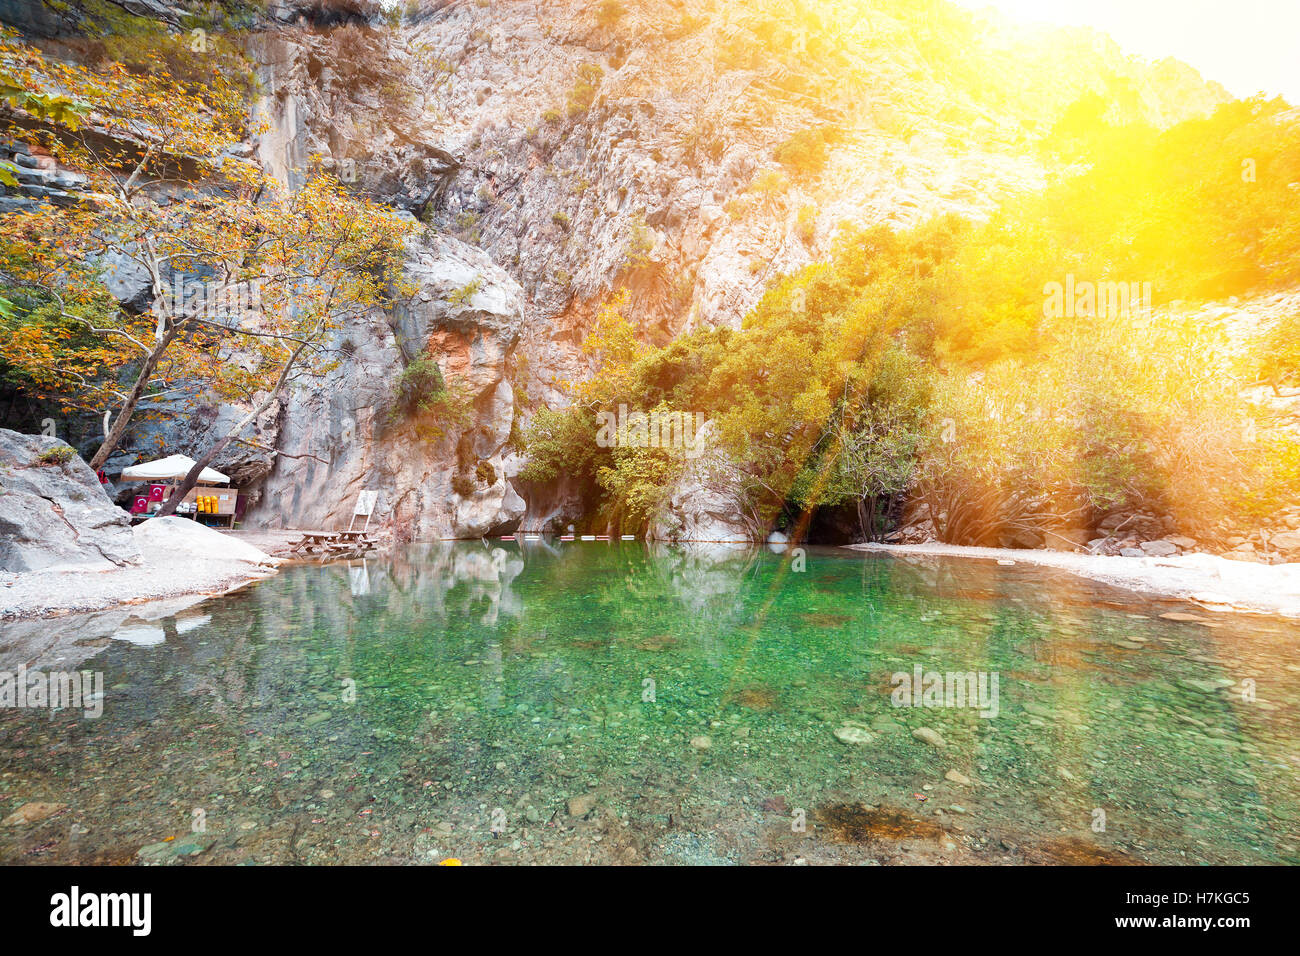 Picturesque scene in Goynuk canyon, located in District of Kemer, Antalya Province. Beautiful sunrise scenery in Turky, Asia. Stock Photo